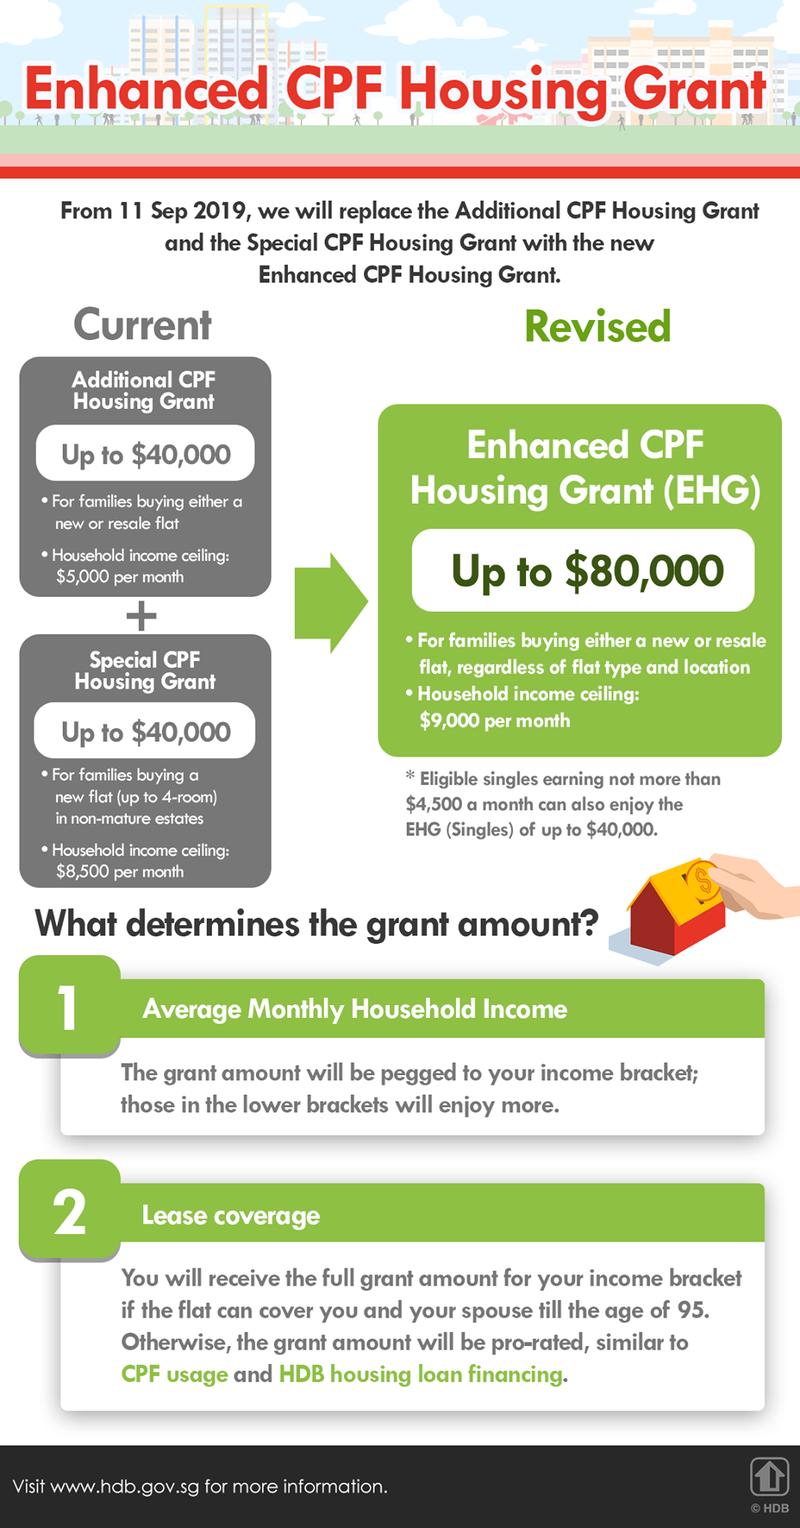 What is the new Enhanced Housing Grant?